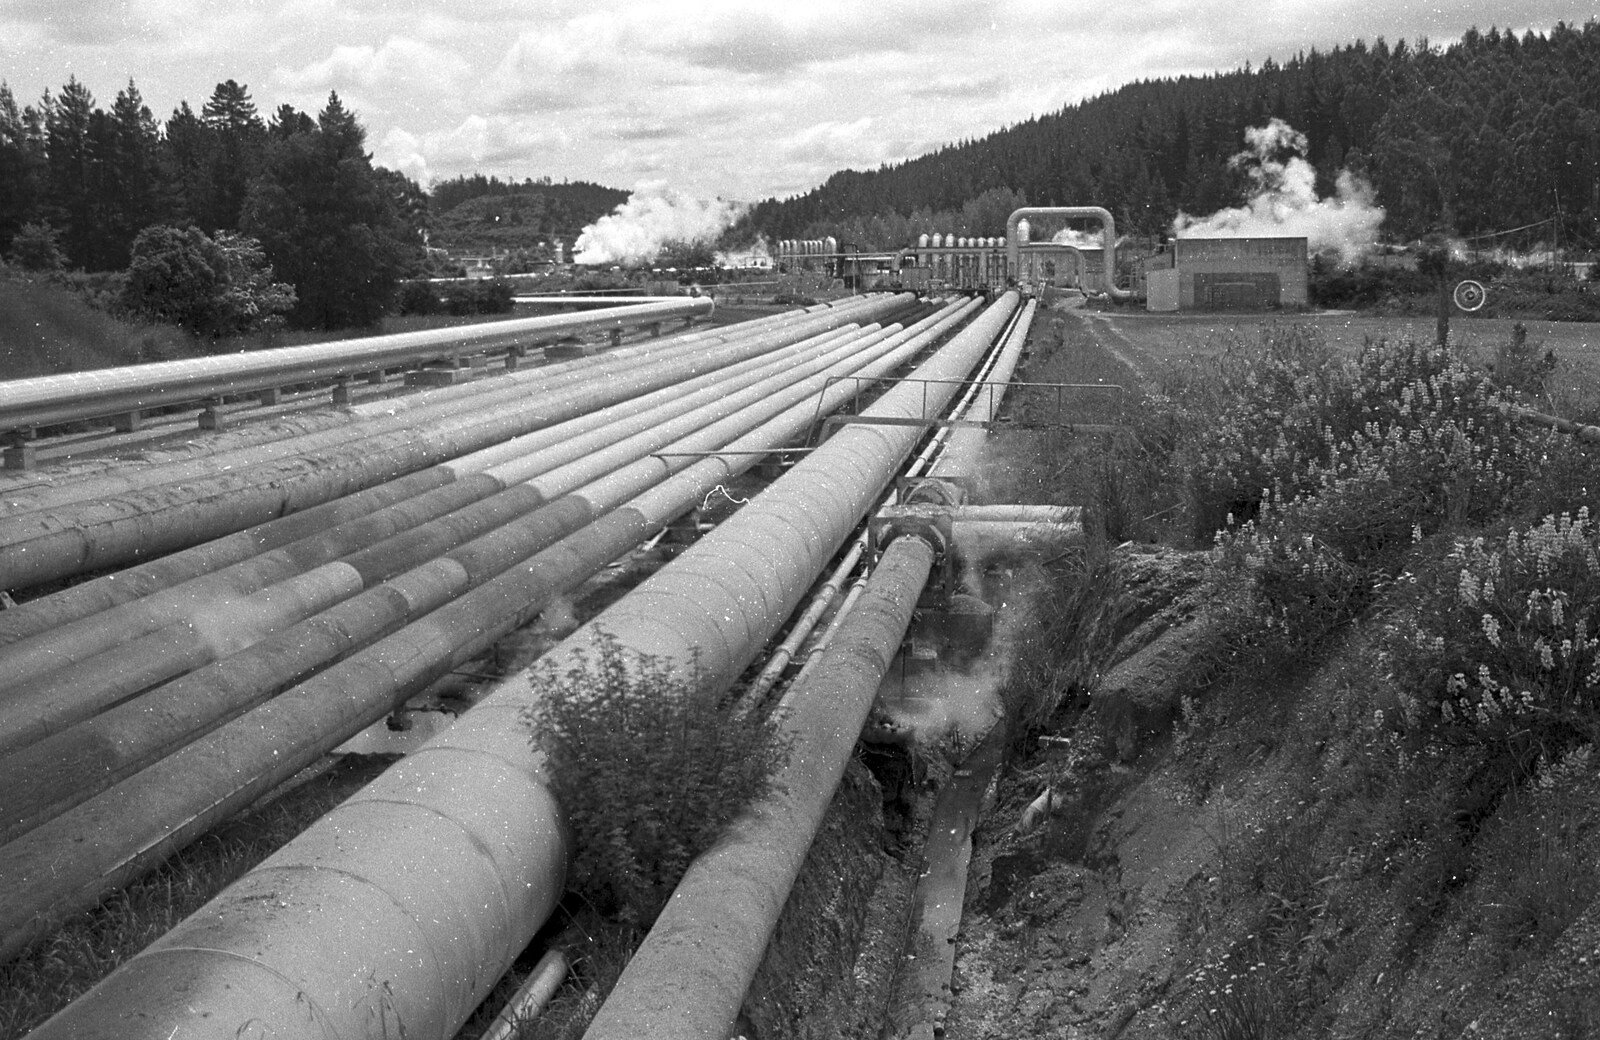 Geothermal pipes from A Road-trip Through Rotorua to Palmerston, North Island, New Zealand - 27th November 1992